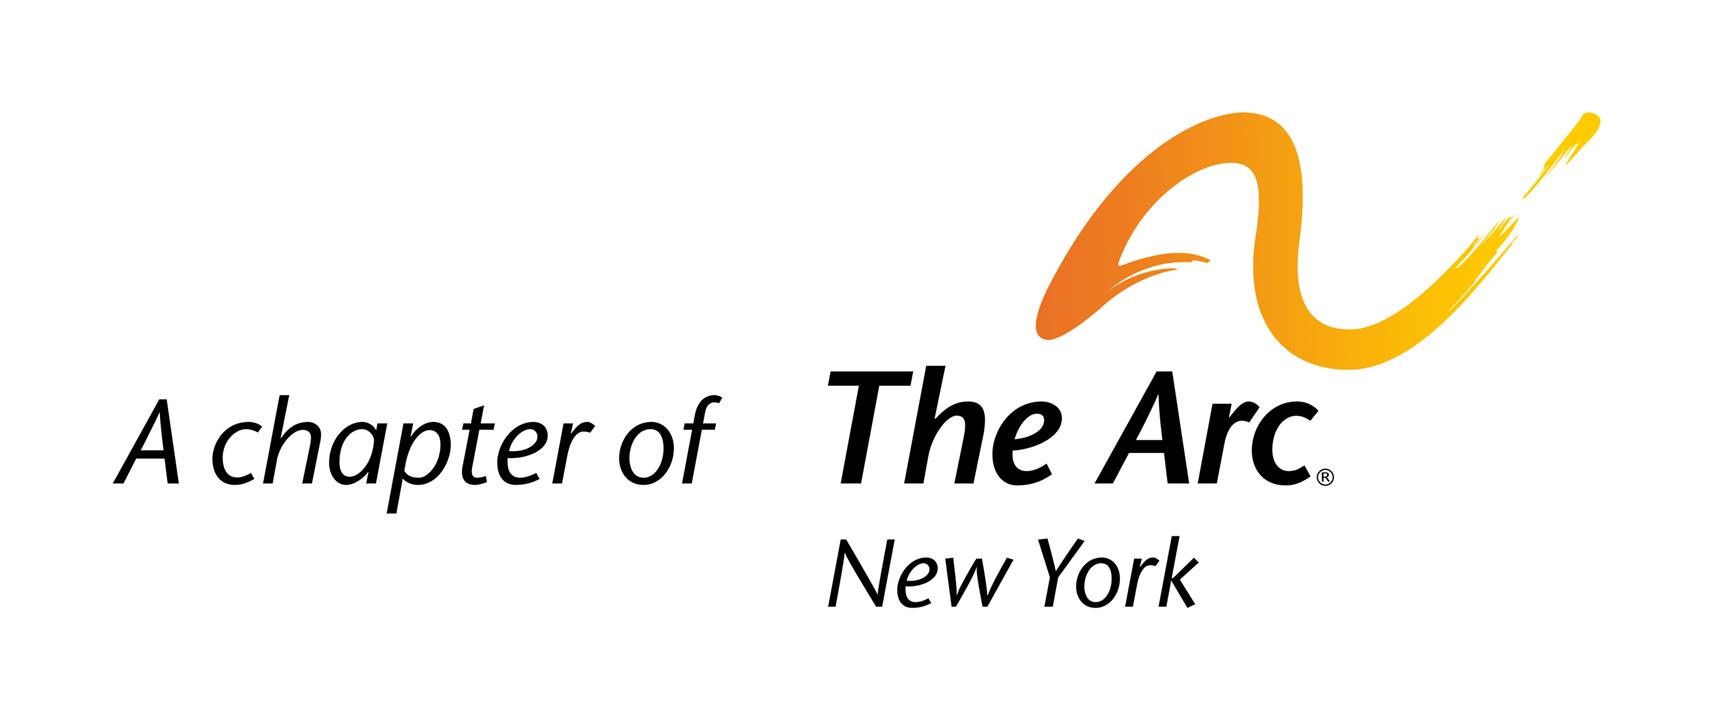 ARC logo for New York State